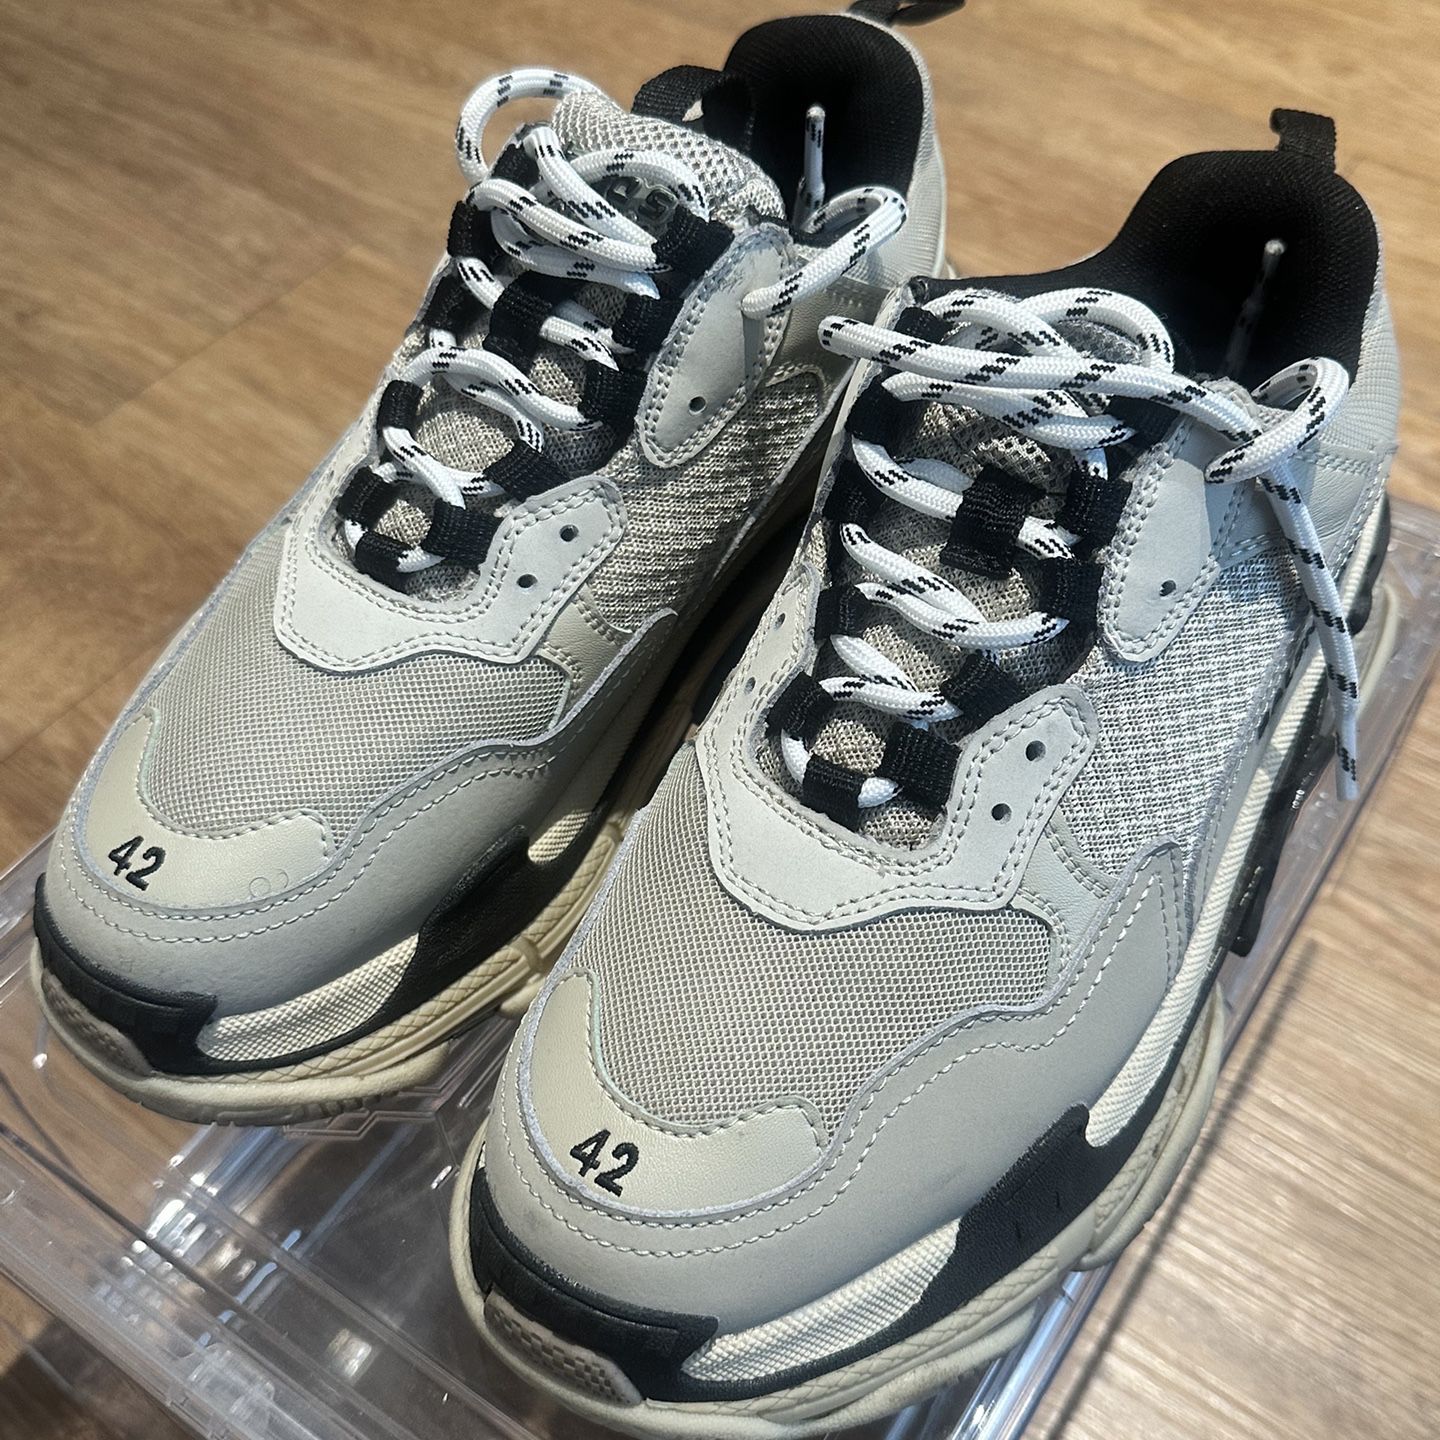 Balenciaga Triple S - Size 42 for Sale in Los Angeles, CA - OfferUp